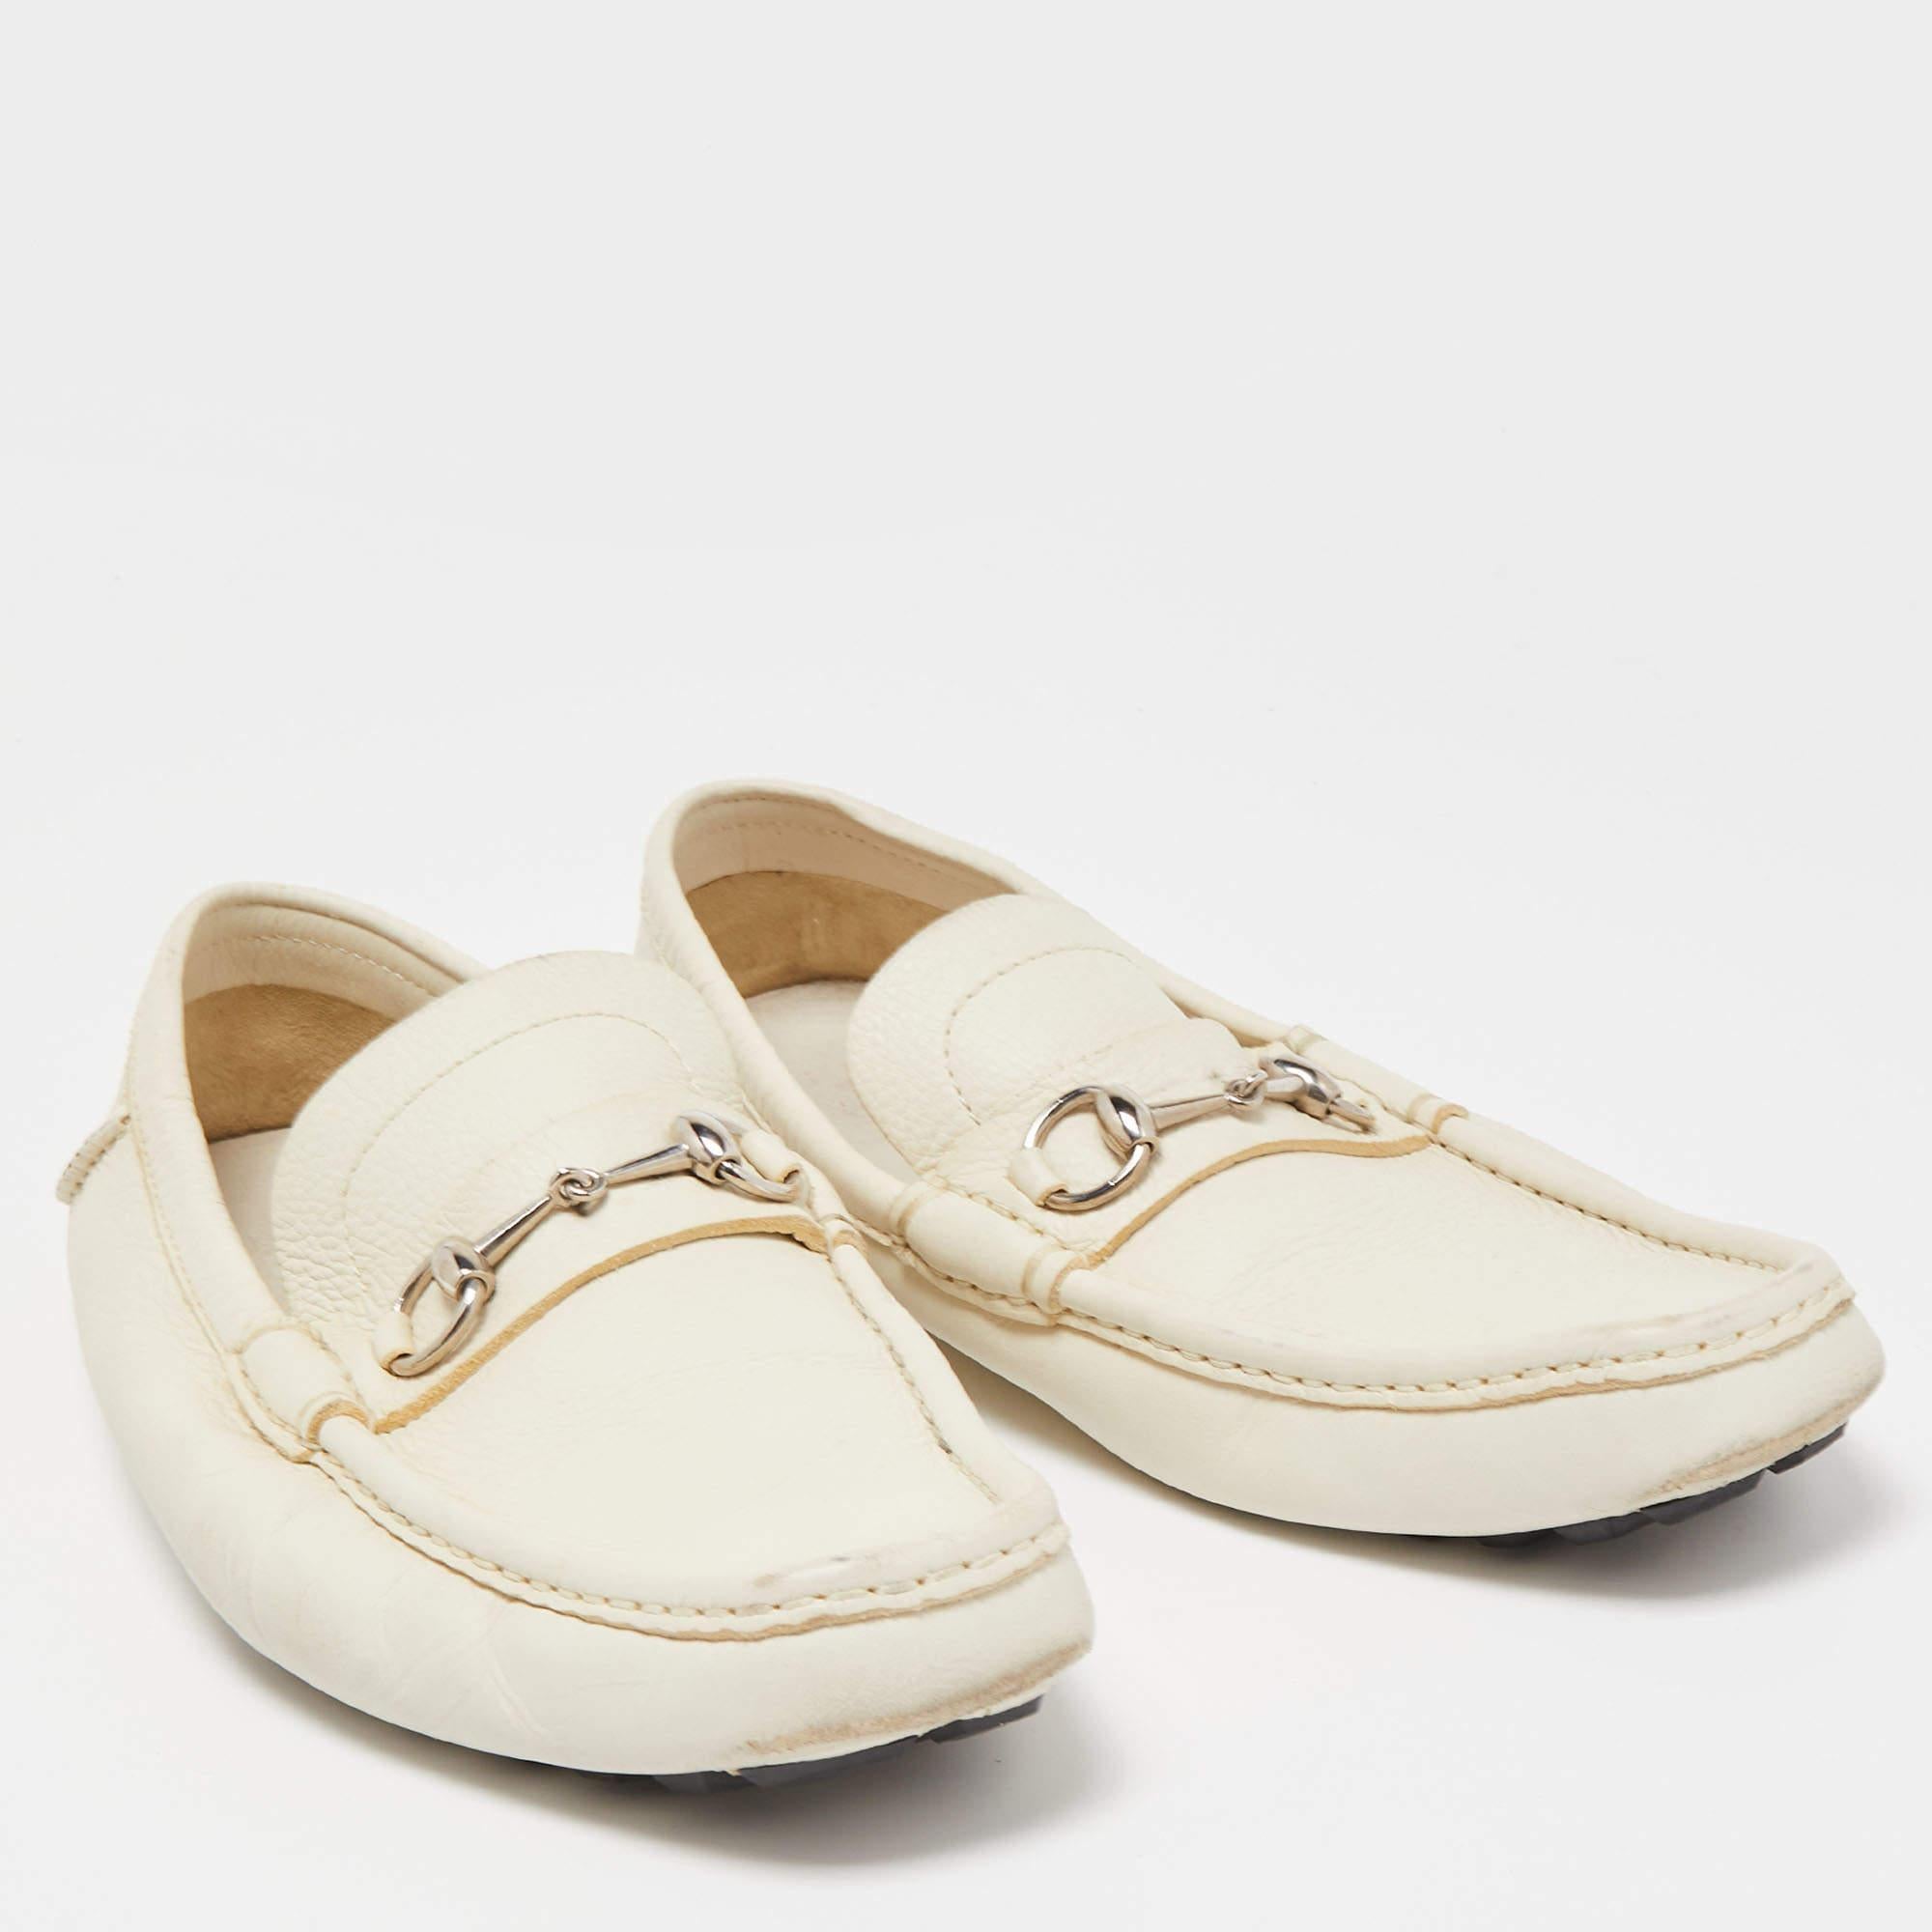 Gucci Cream Leather Horsebit Loafers Size 45 For Sale 1